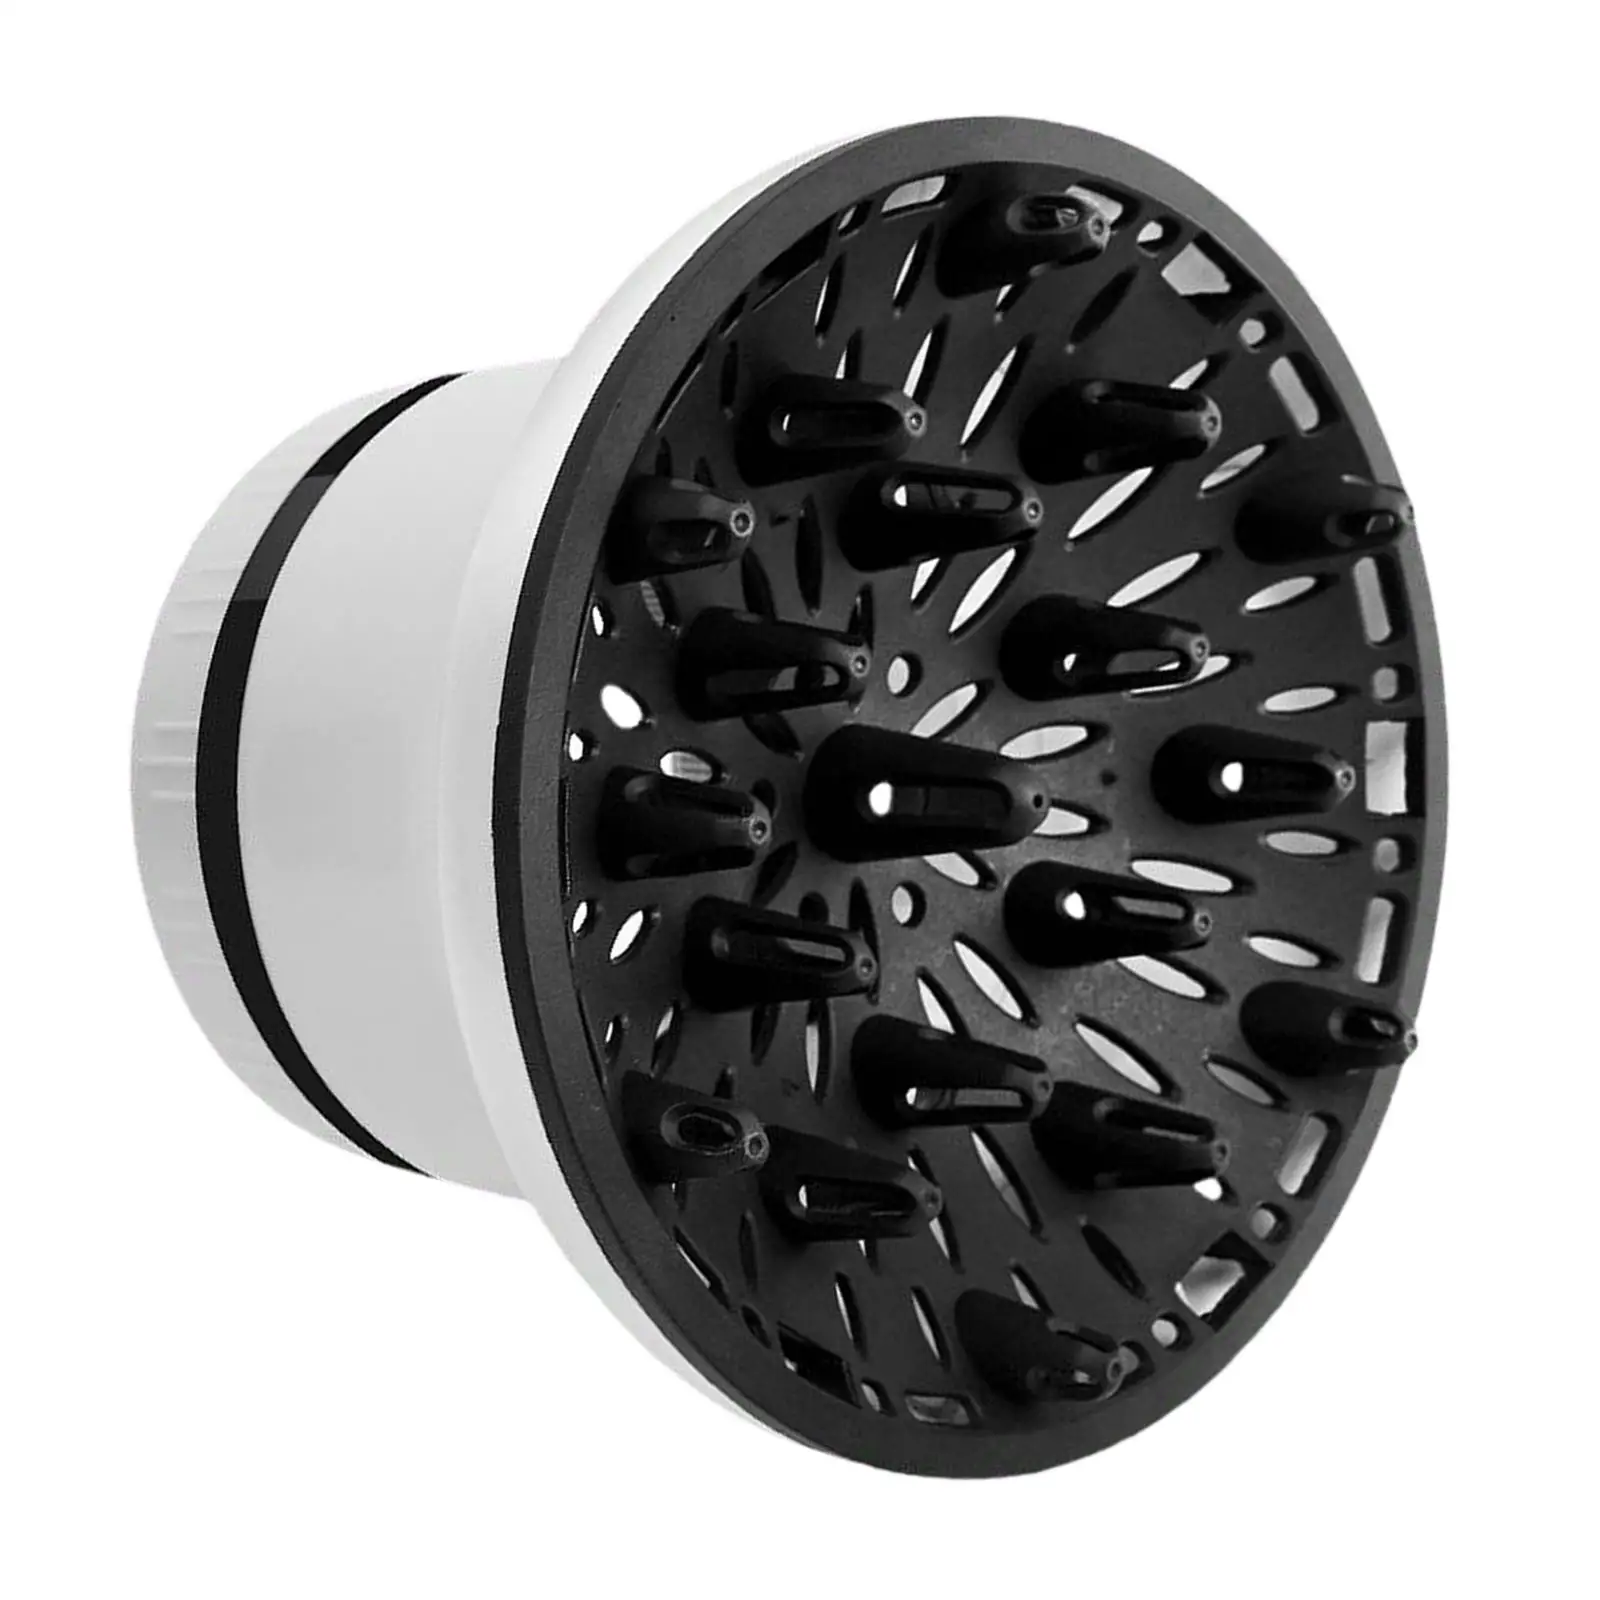 Universal Hair Dryer Diffuser Attachment Fits Over 1.4-3.1 Inch